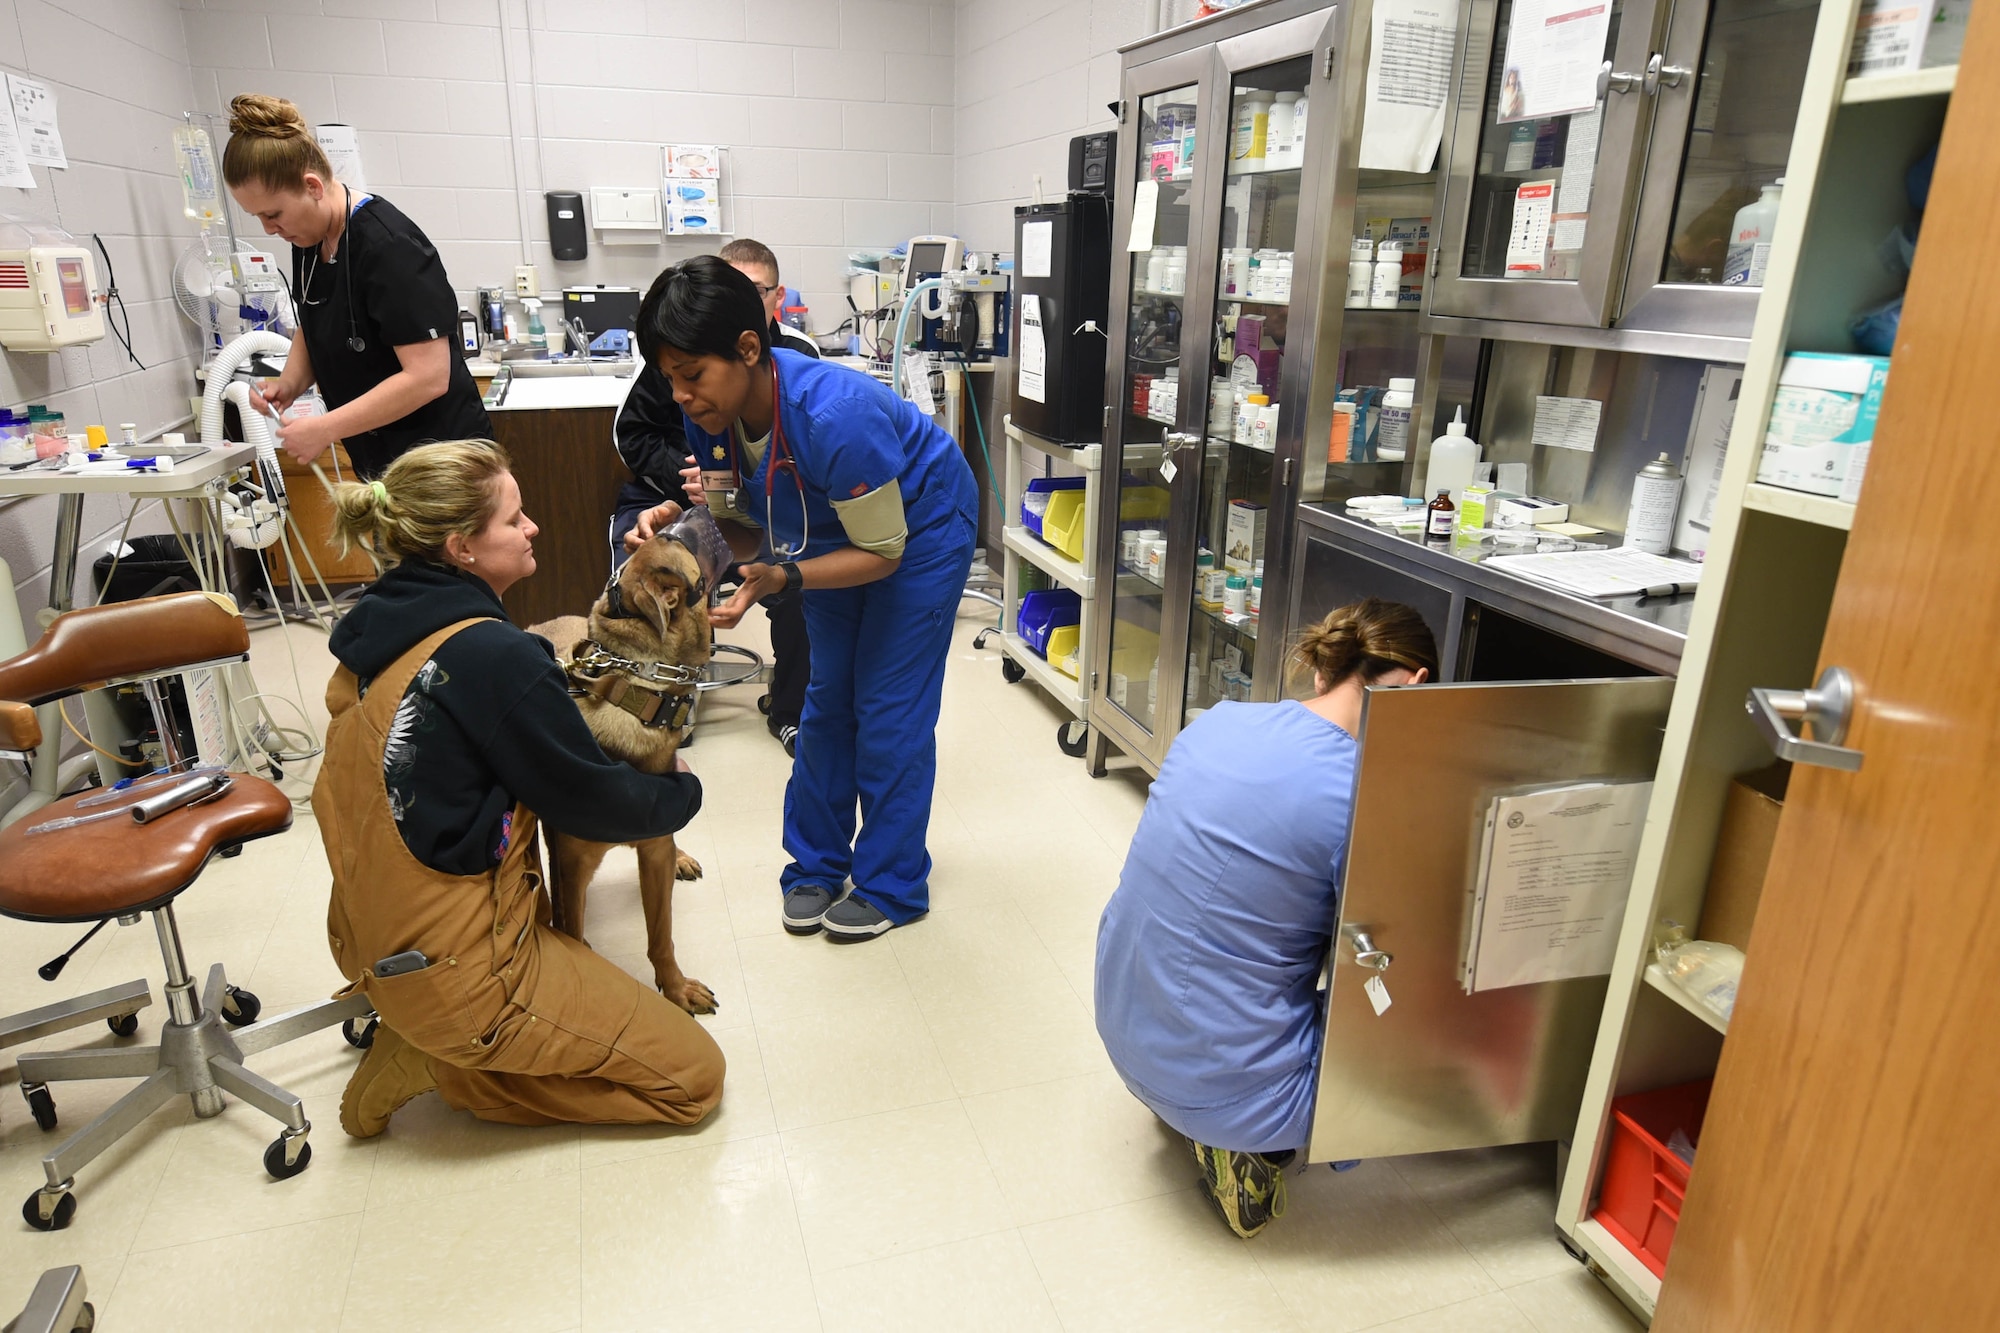 Staff Sgt. Samantha Champion (bottom left), a 28th Security Forces Squadron military working dog handler, holds on to MWD Lezer as veterinarian U.S. Army Maj. N. Chre Benton-Castagneto starts to look him over at the veterinary clinic on Ellsworth Air Force Base, S.D., Dec. 4, 2018. While the Air Force provides all of the MWDs for the Department of Defense, it’s the Army that takes care of their medical needs. (U.S. Air Force photo by Airman John Ennis)